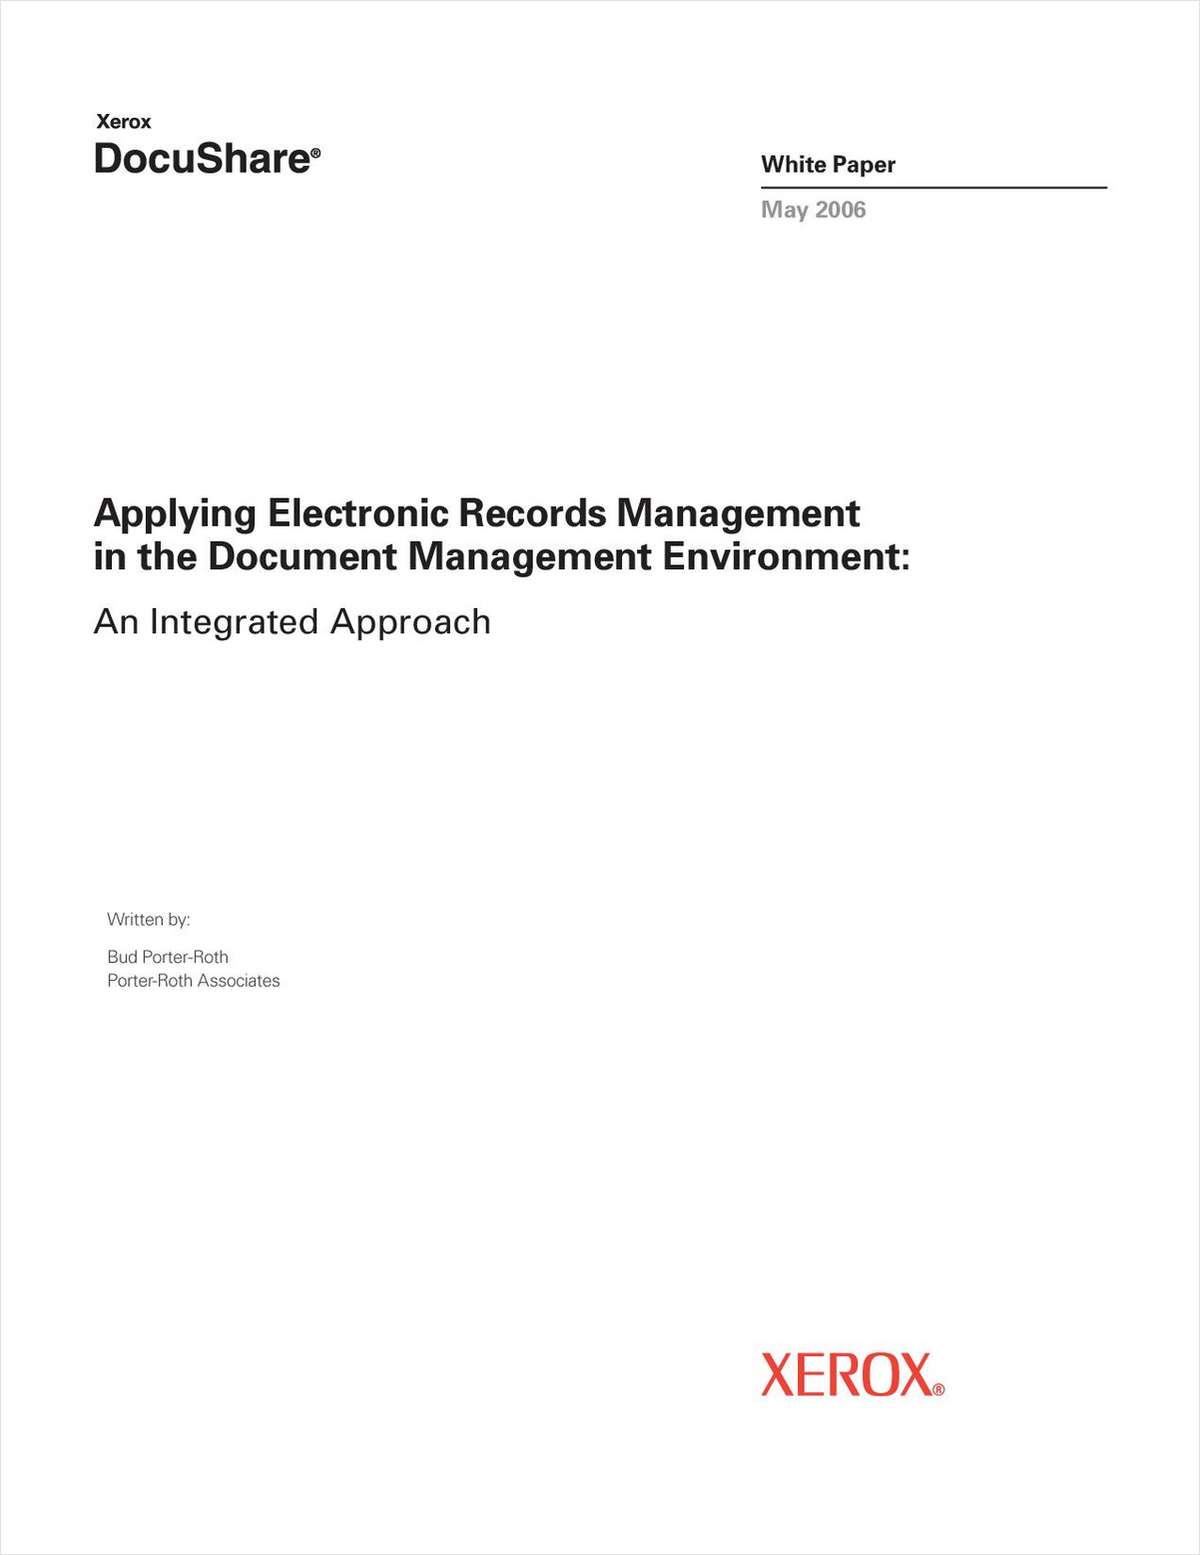 Applying Electronic Records Management in the Document Management Environment: An Integrated Approach